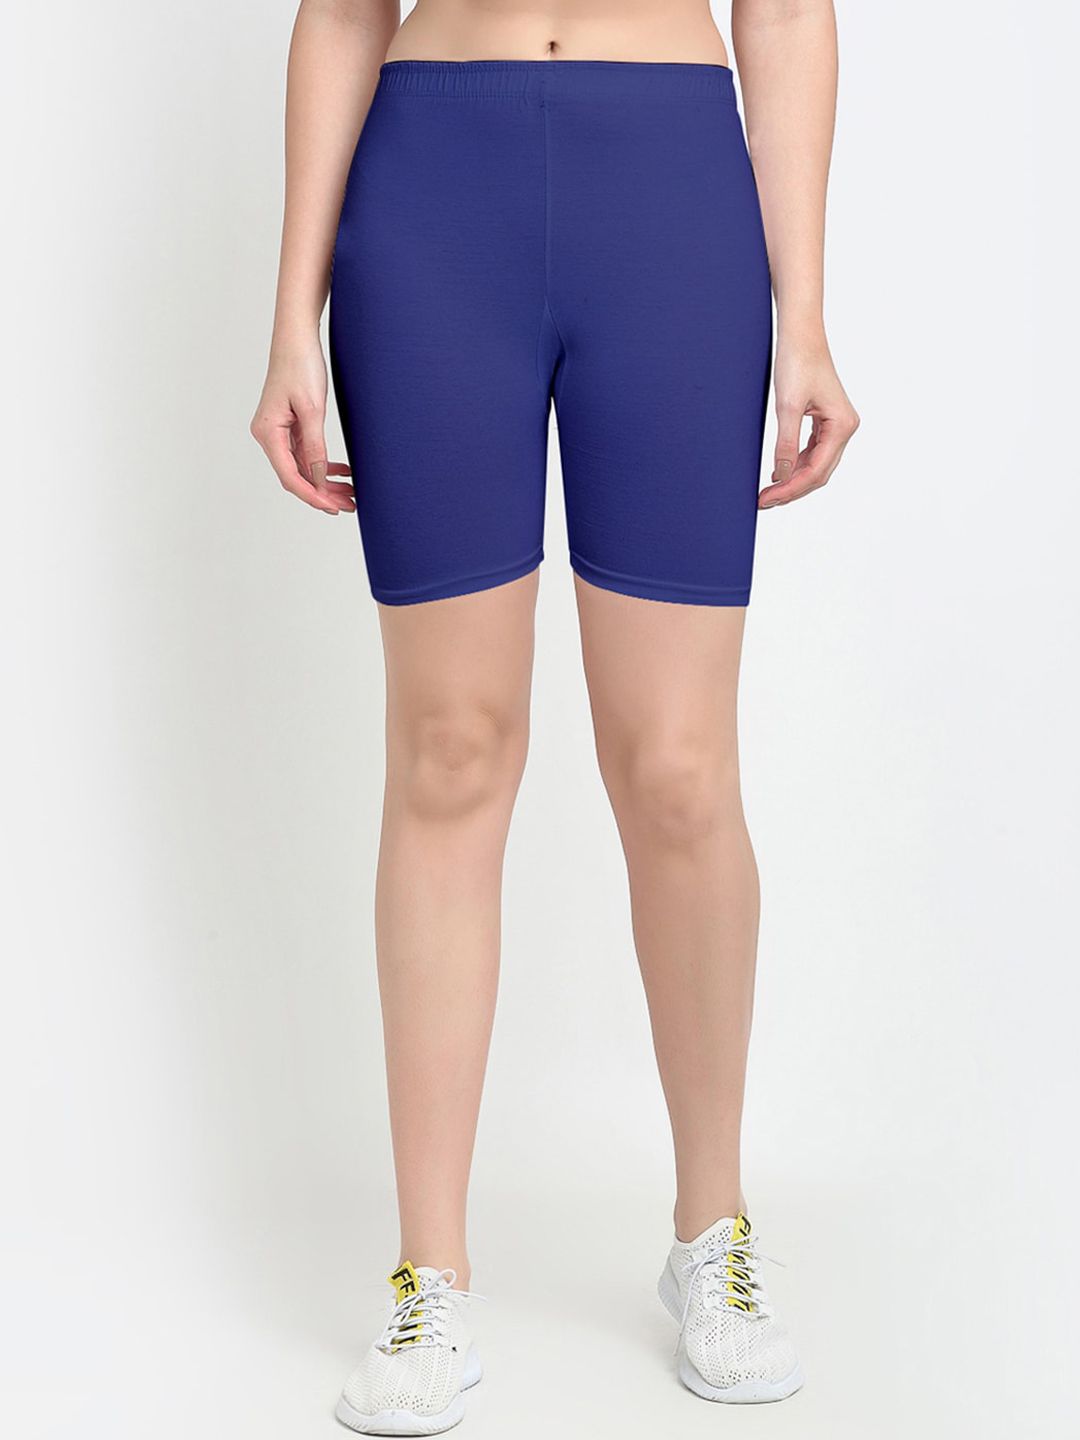 GRACIT Women Blue Cotton Pack of 3 Cycling Sports Shorts Price in India